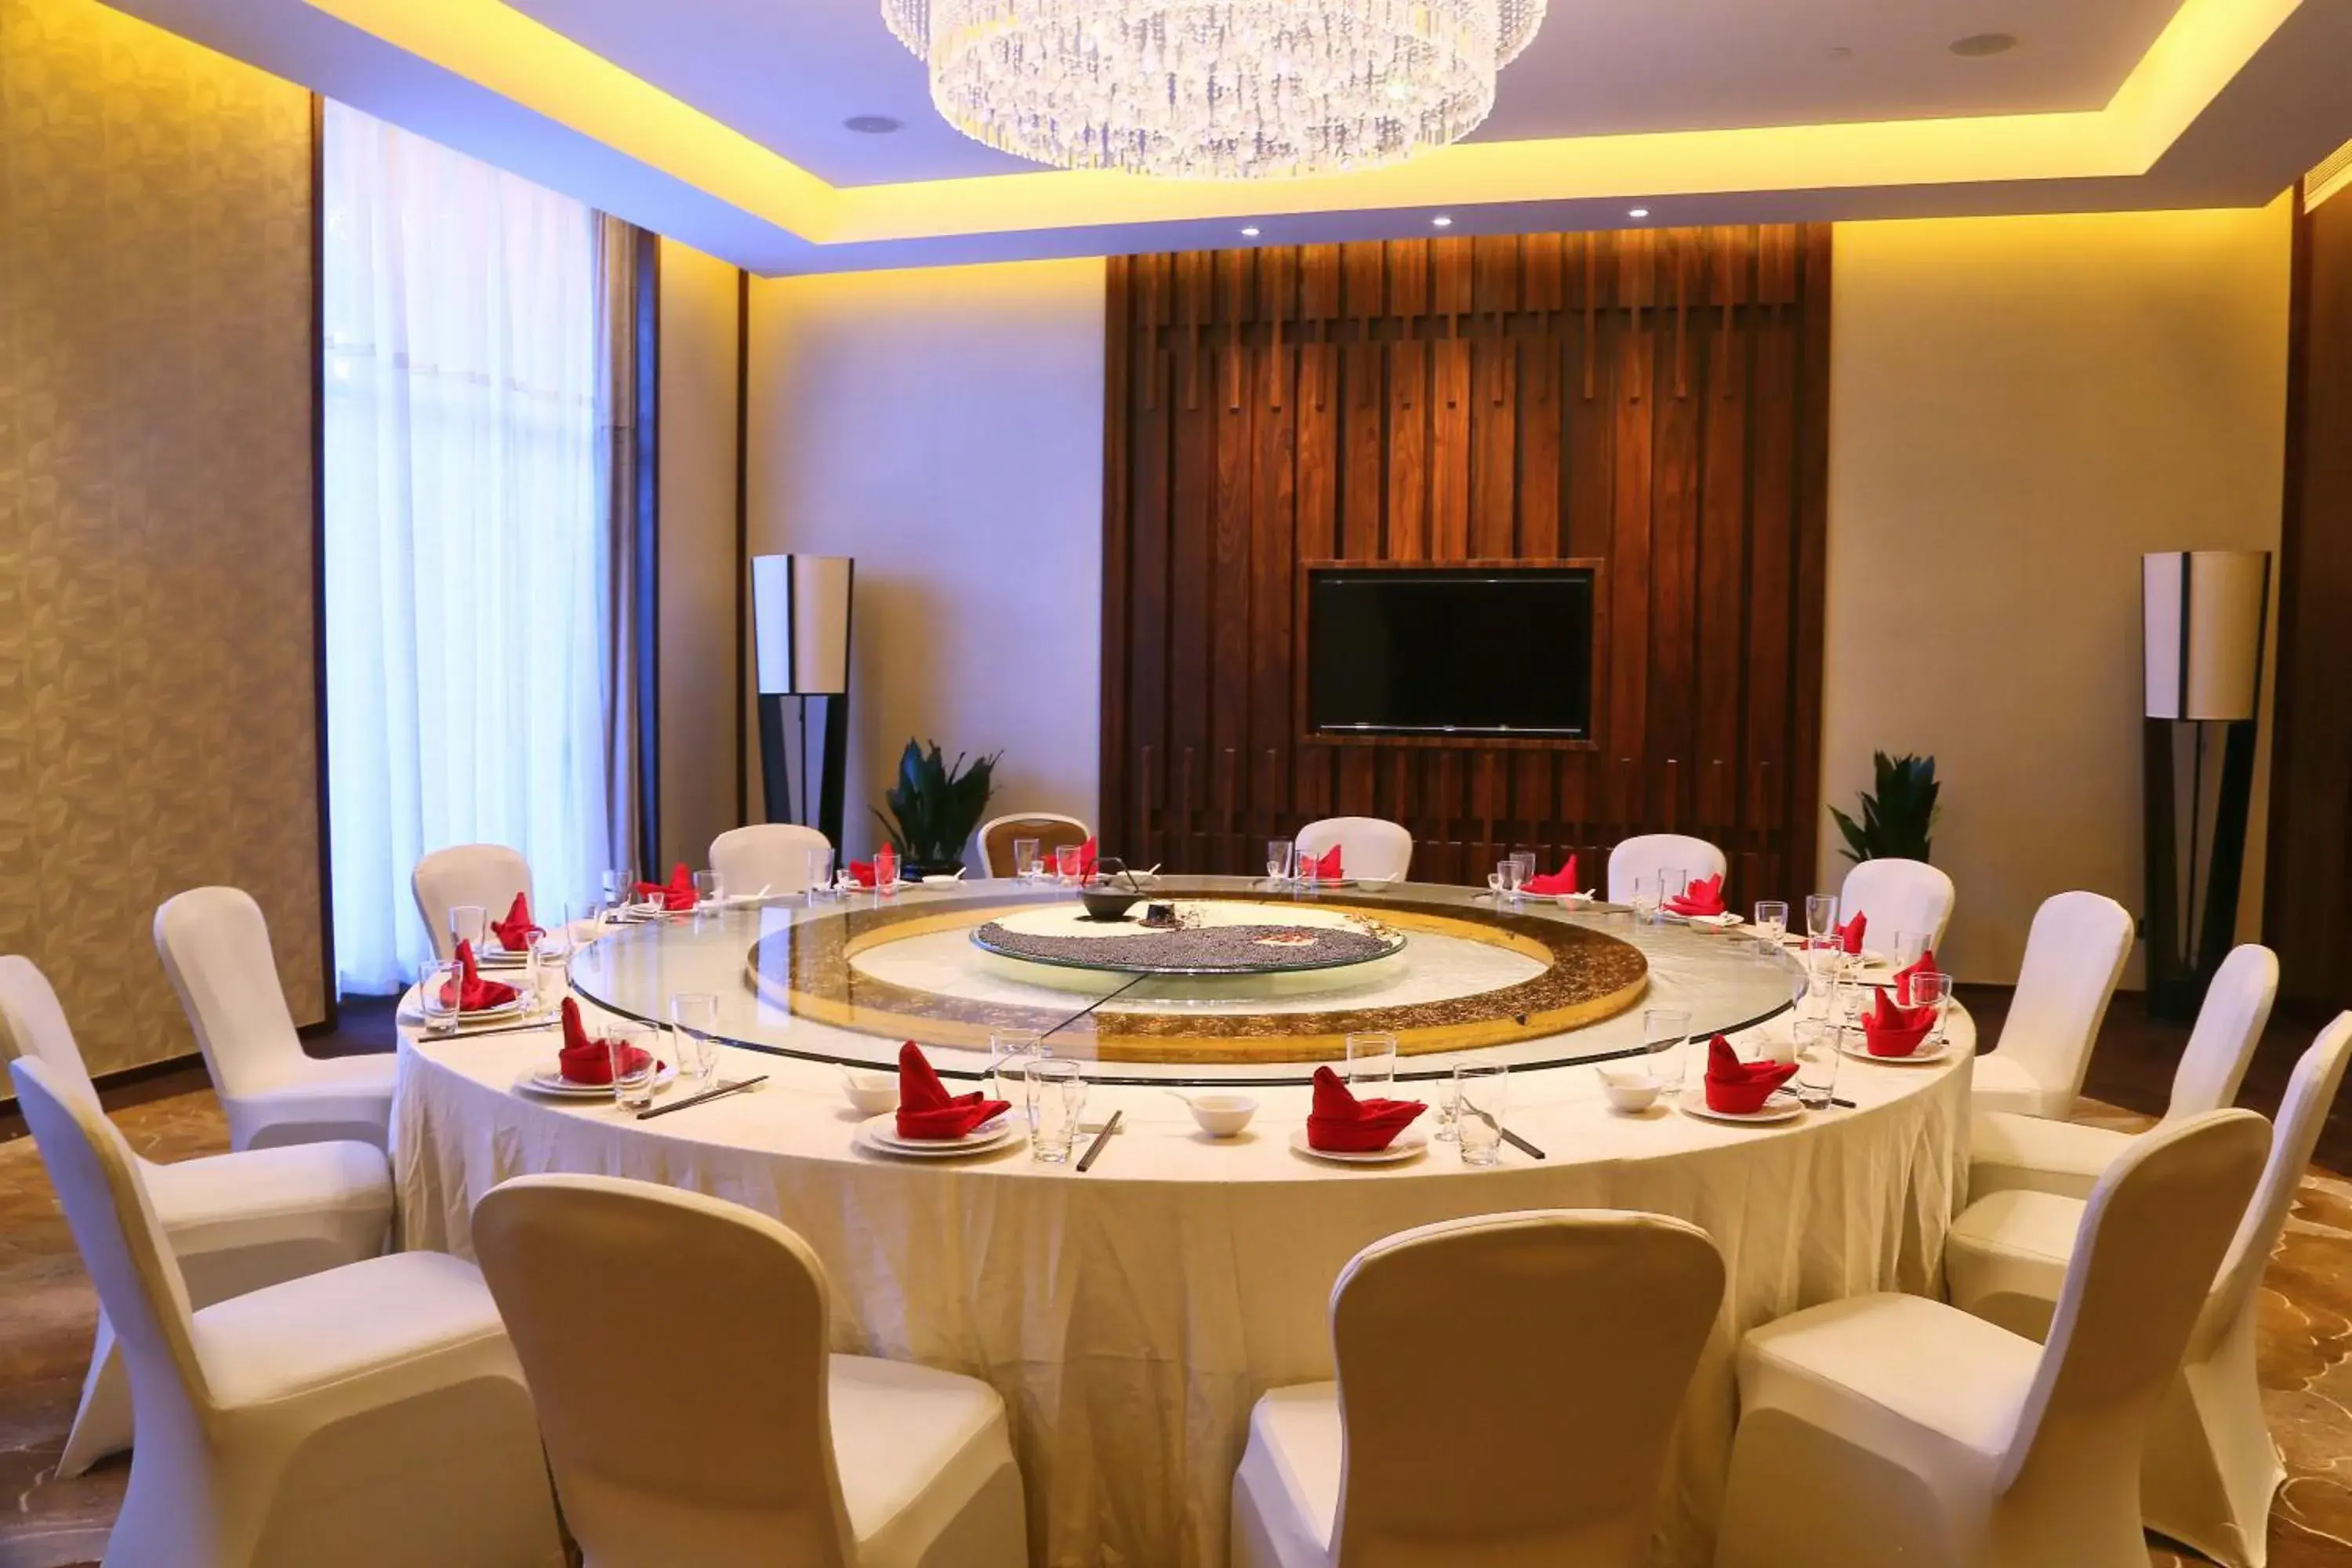 Meeting/conference room, Banquet Facilities in Neodalle Zhangjiajie Wulingyuan